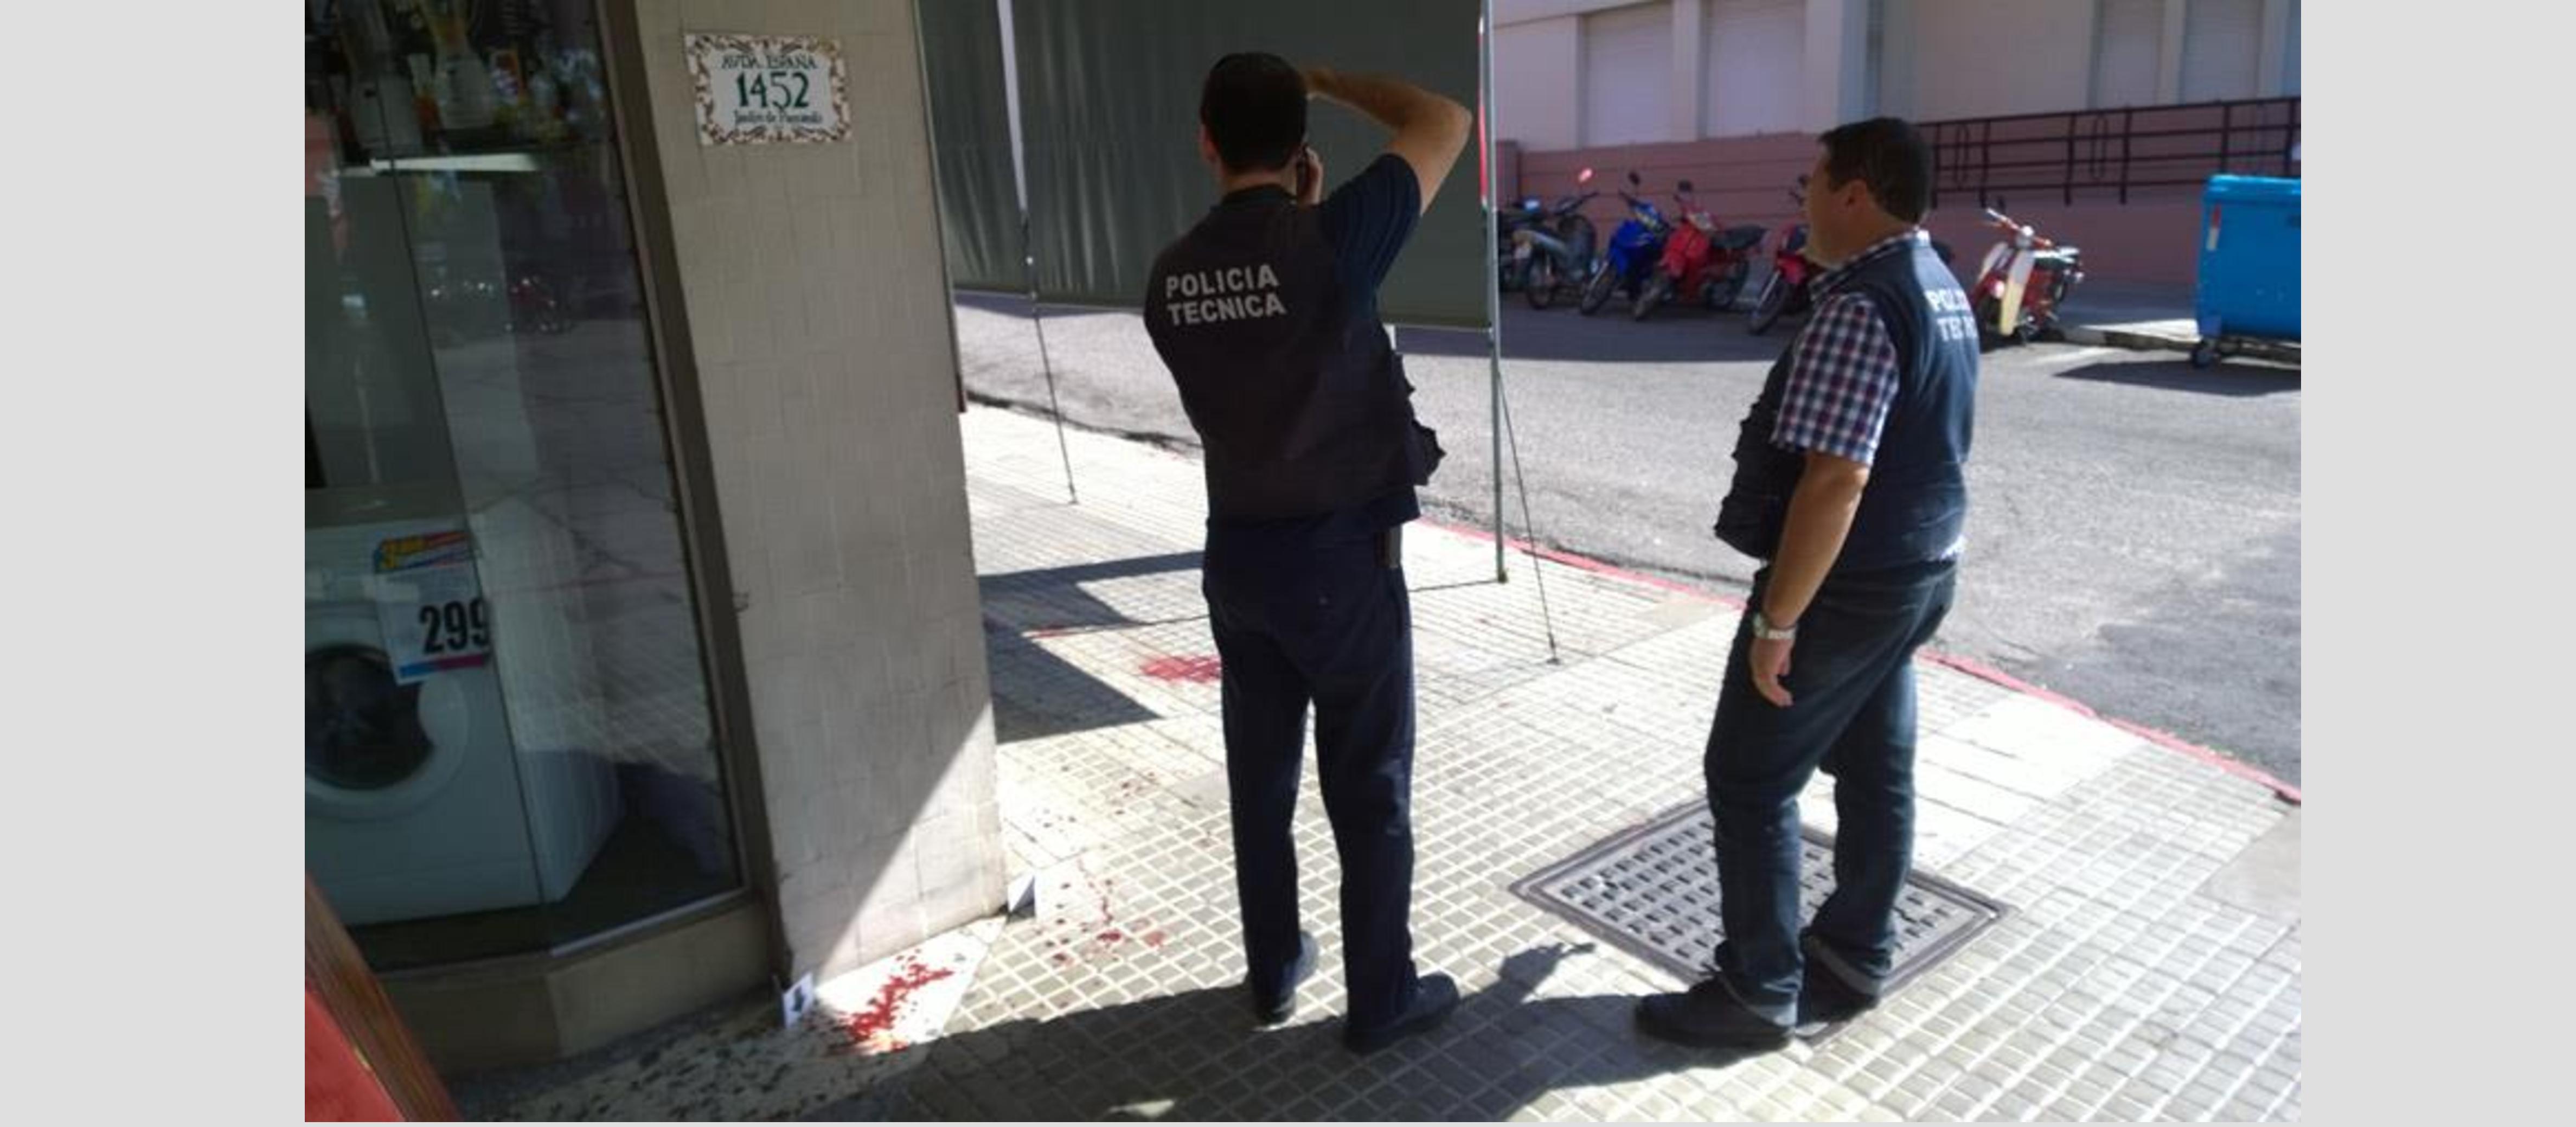 Jewish man stabbed to death in Uruguay in suspected anti-Semitic attack